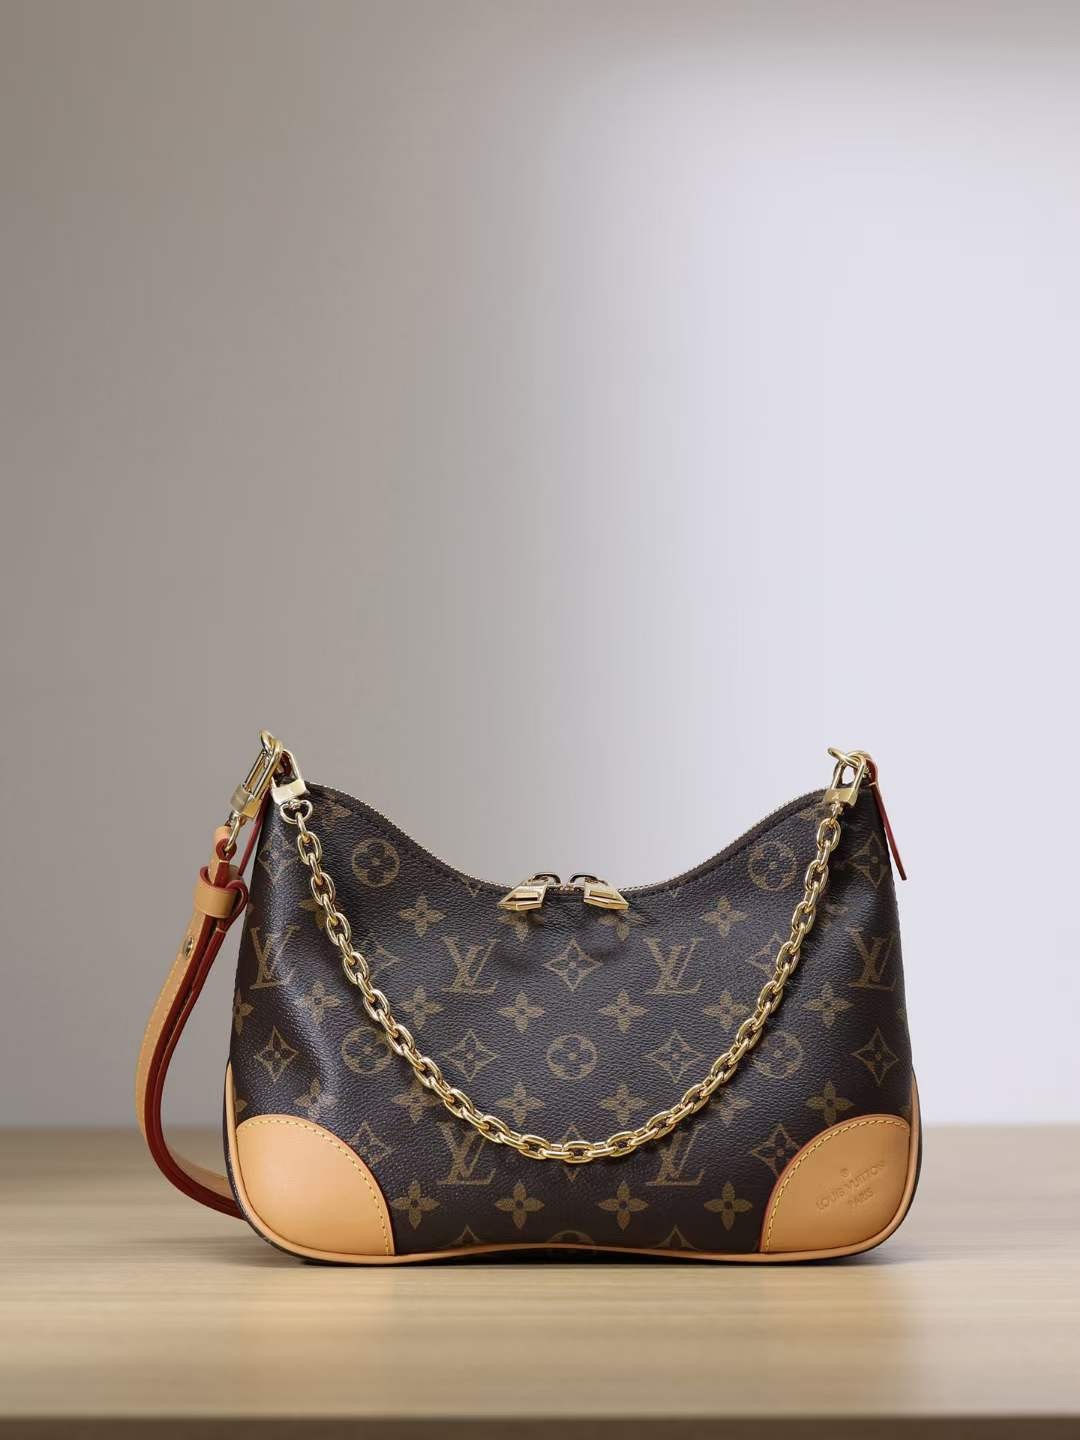 Louis Vuitton M45832 Boulogne Top Replica Handbag Overall Appearance (2022 Latest)-Best Quality Fake designer Bag Review, Replica designer bag ru